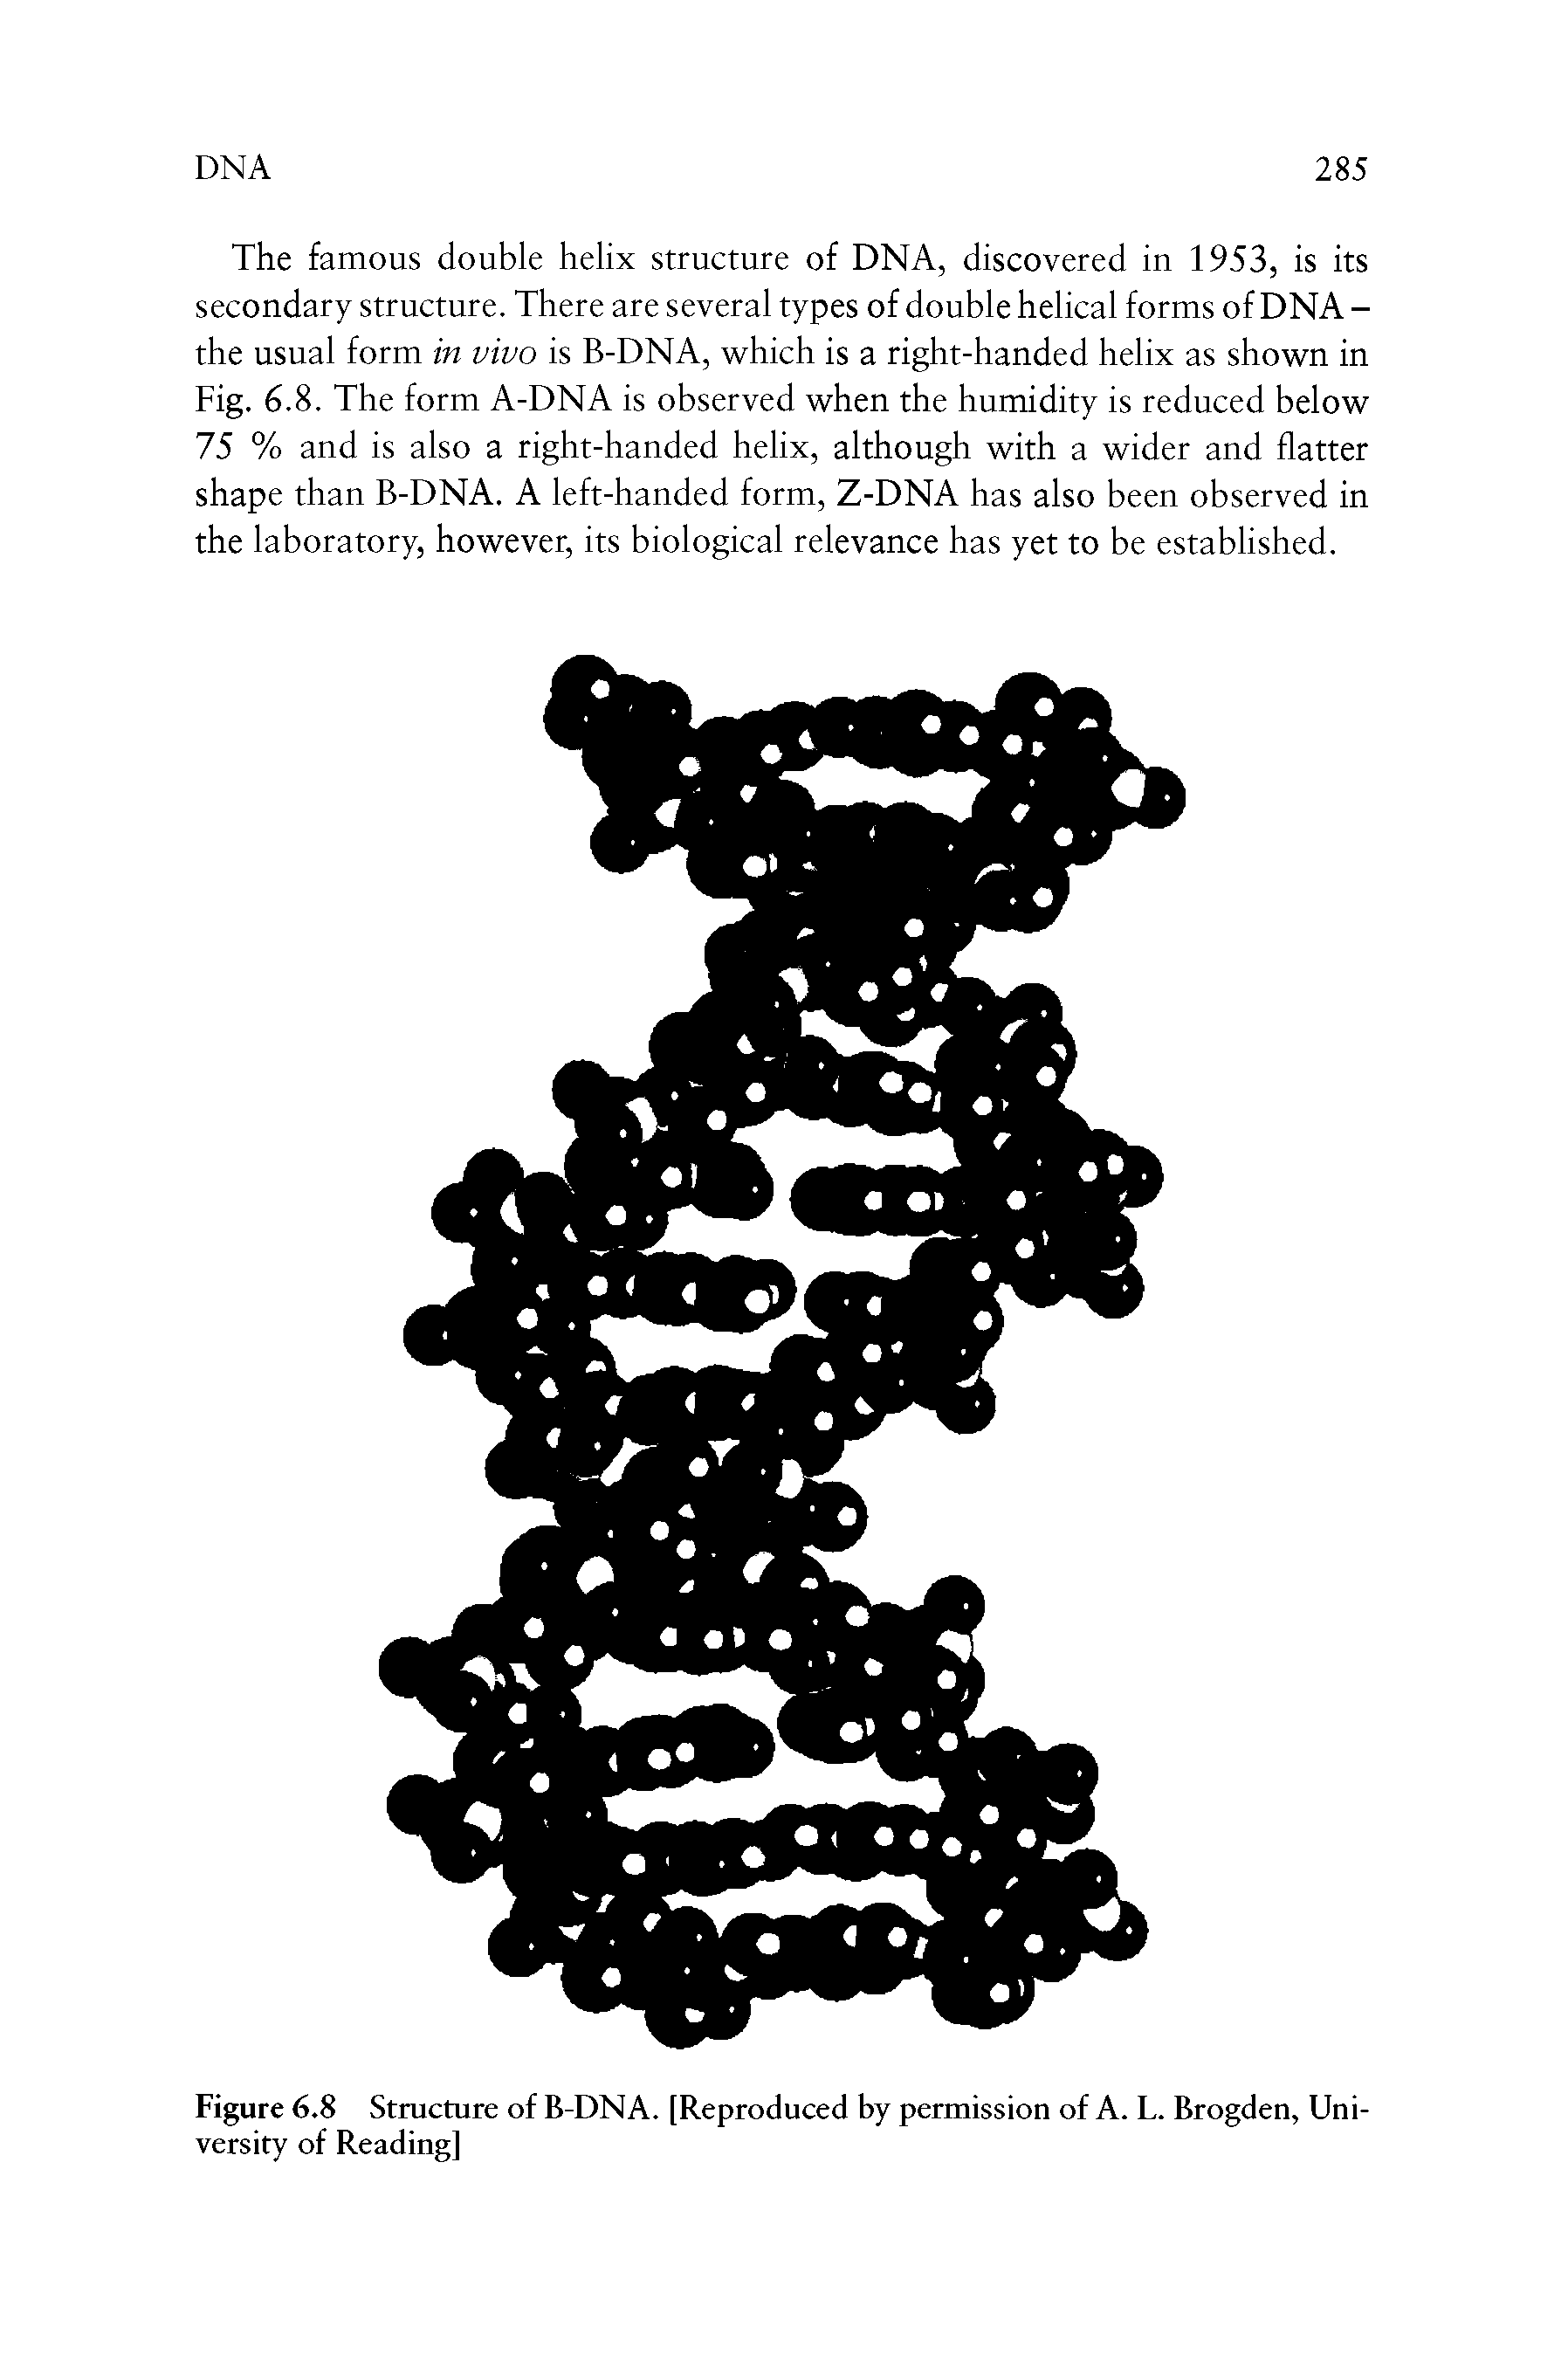 Figure 6.8 Structure of B-DNA. [Reproduced by permission of A. L. Brogden, University of Reading]...